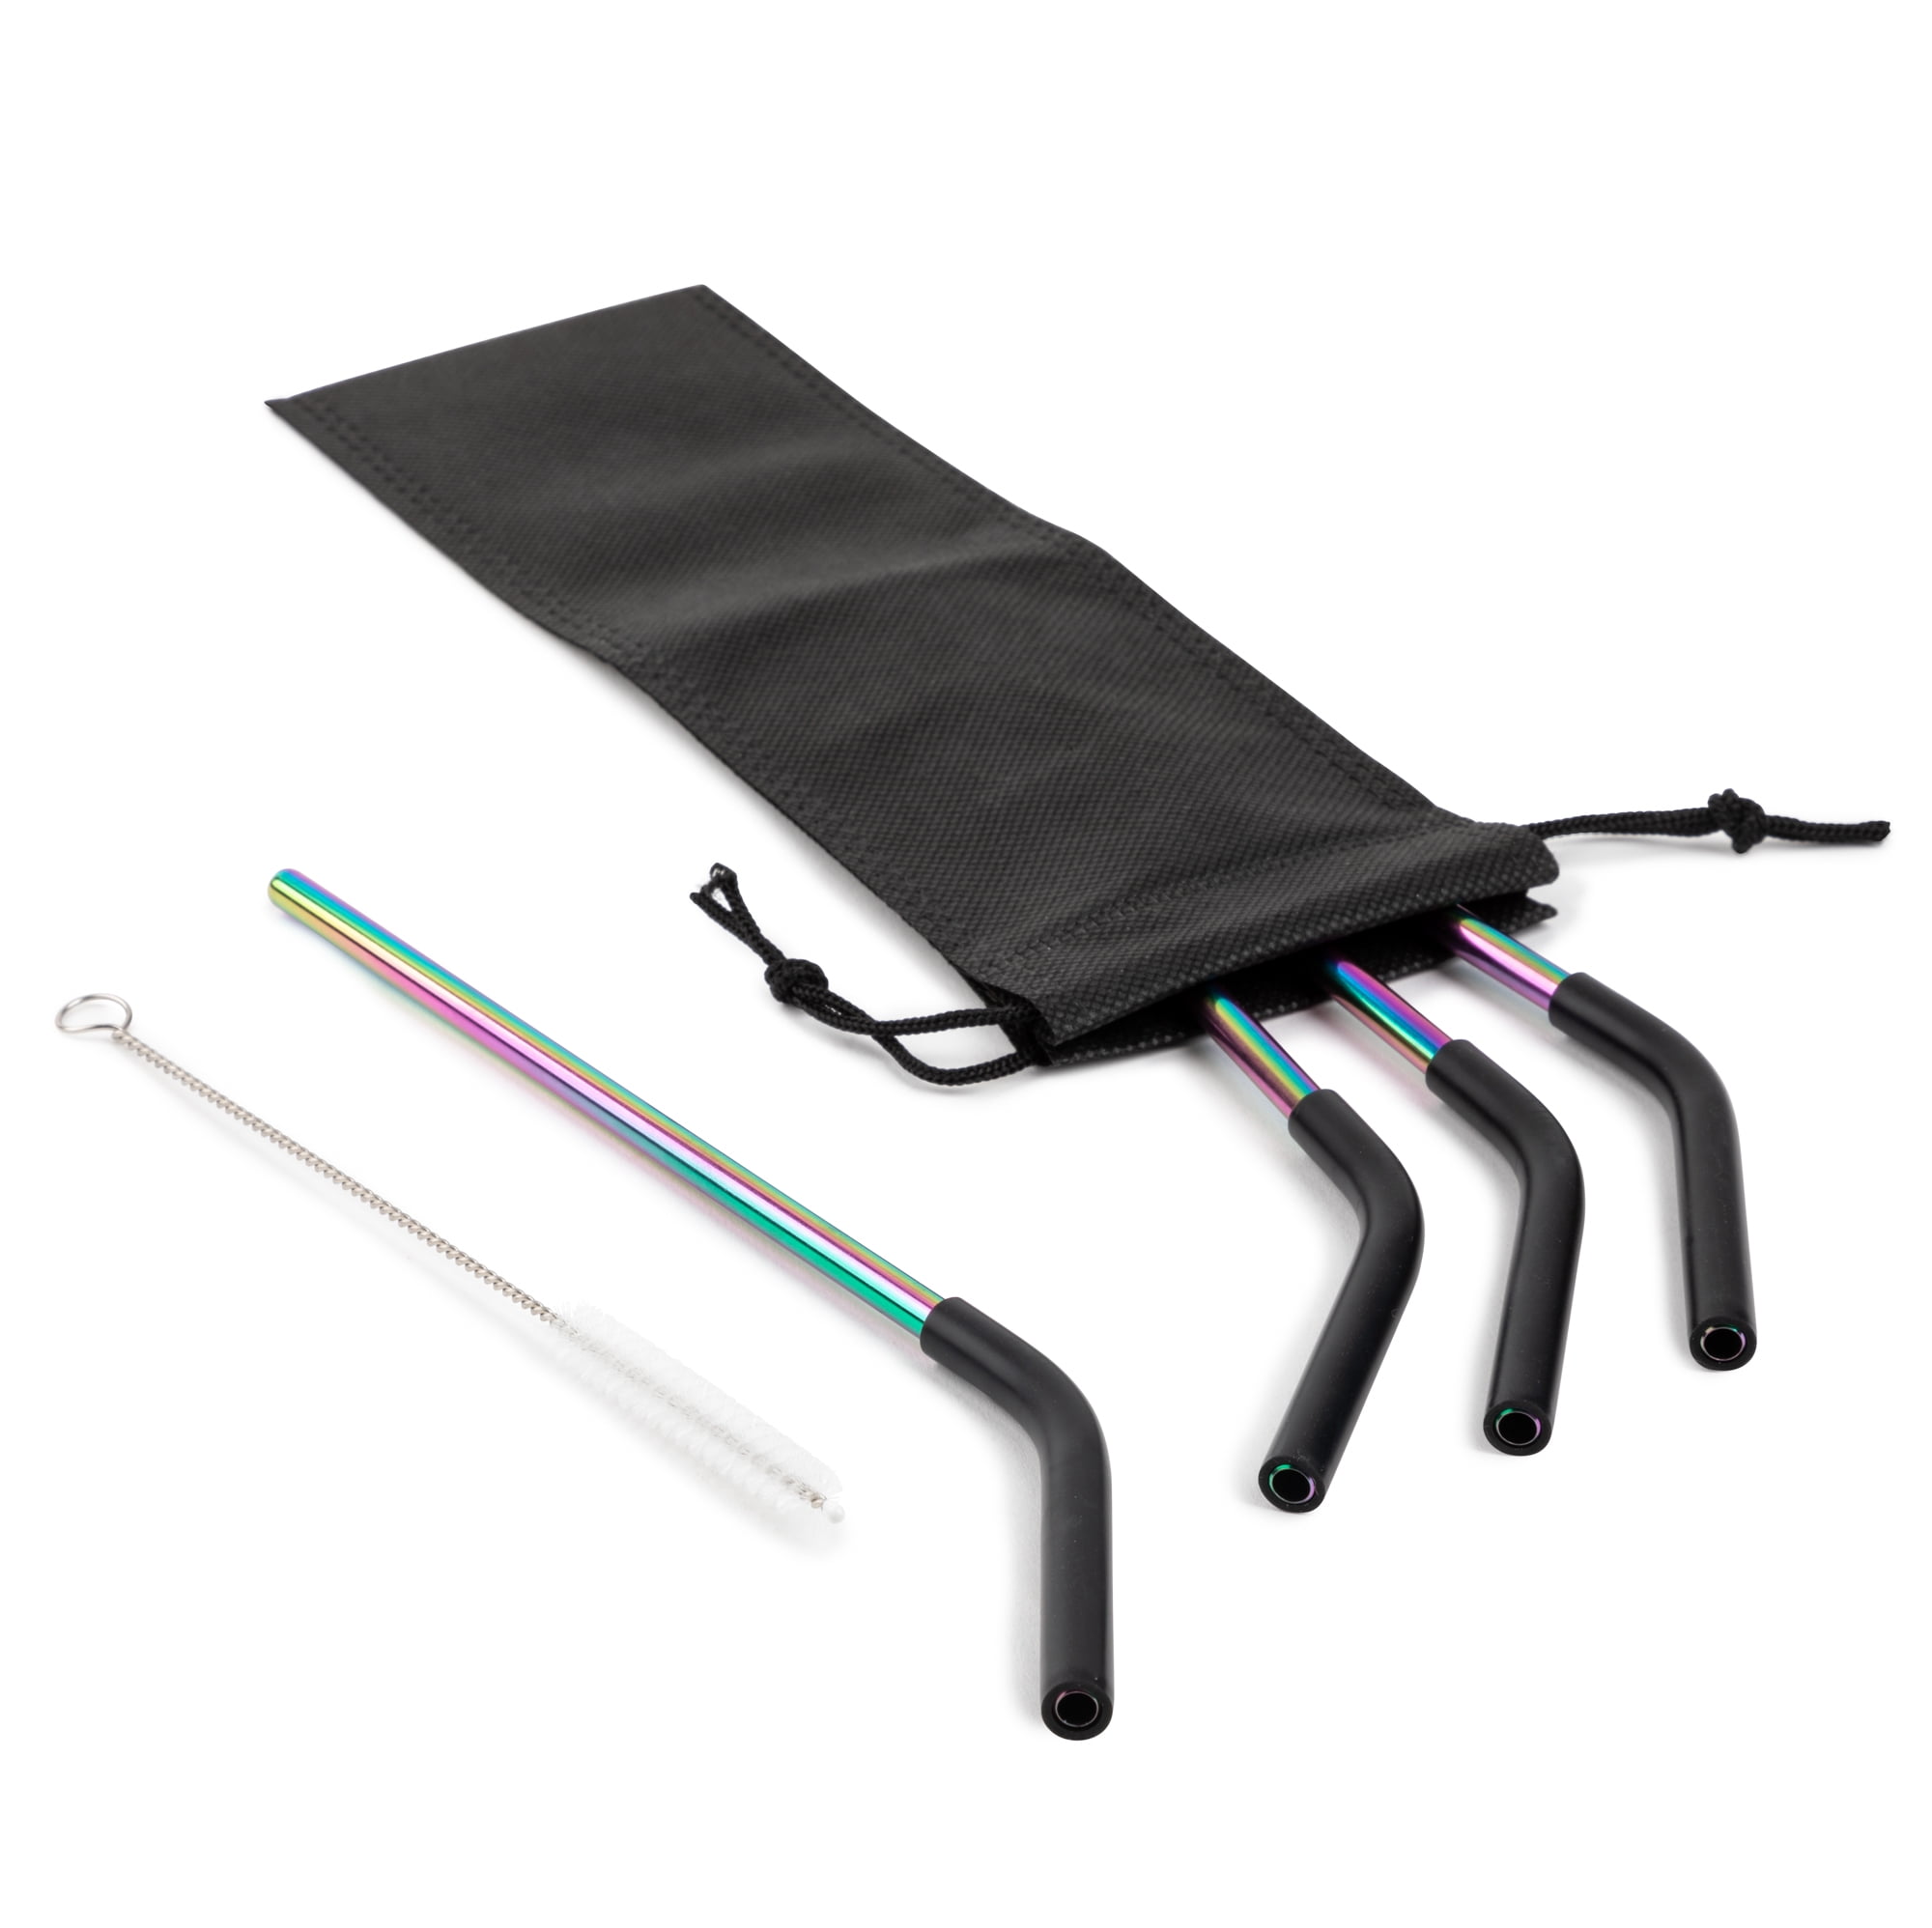 Tal Stainless Rainbow Straw Steel Straw & Bag Set with Straw Cleaning Brush, 6 Piece Set